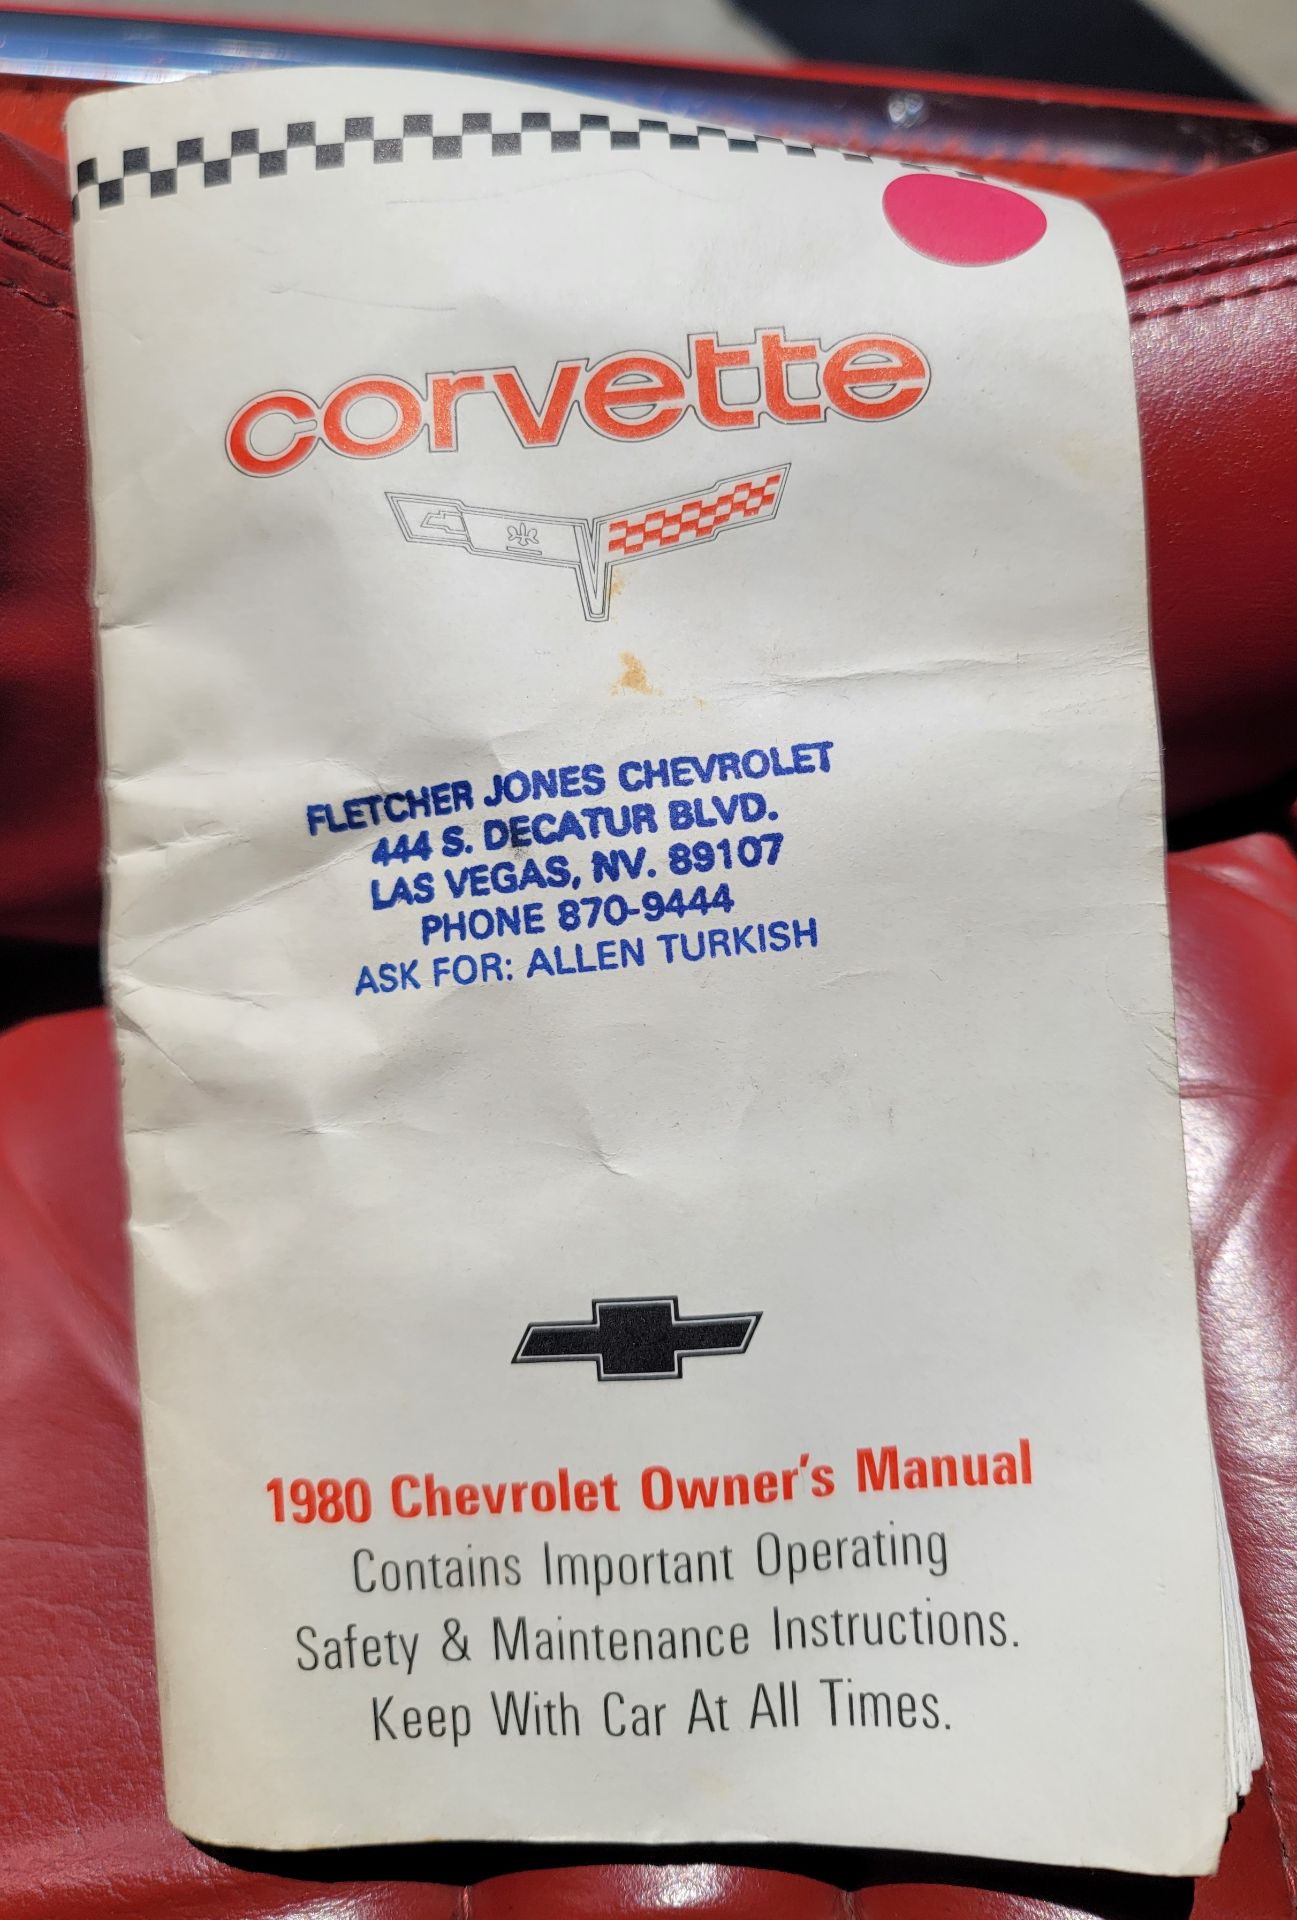 1980 CHEVROLET CORVETTE, WAS VIC EDELBROCK'S PERSONAL CAR BOUGHT FOR R&D, RED INTERIOR, TITLE ONLY. - Image 22 of 70